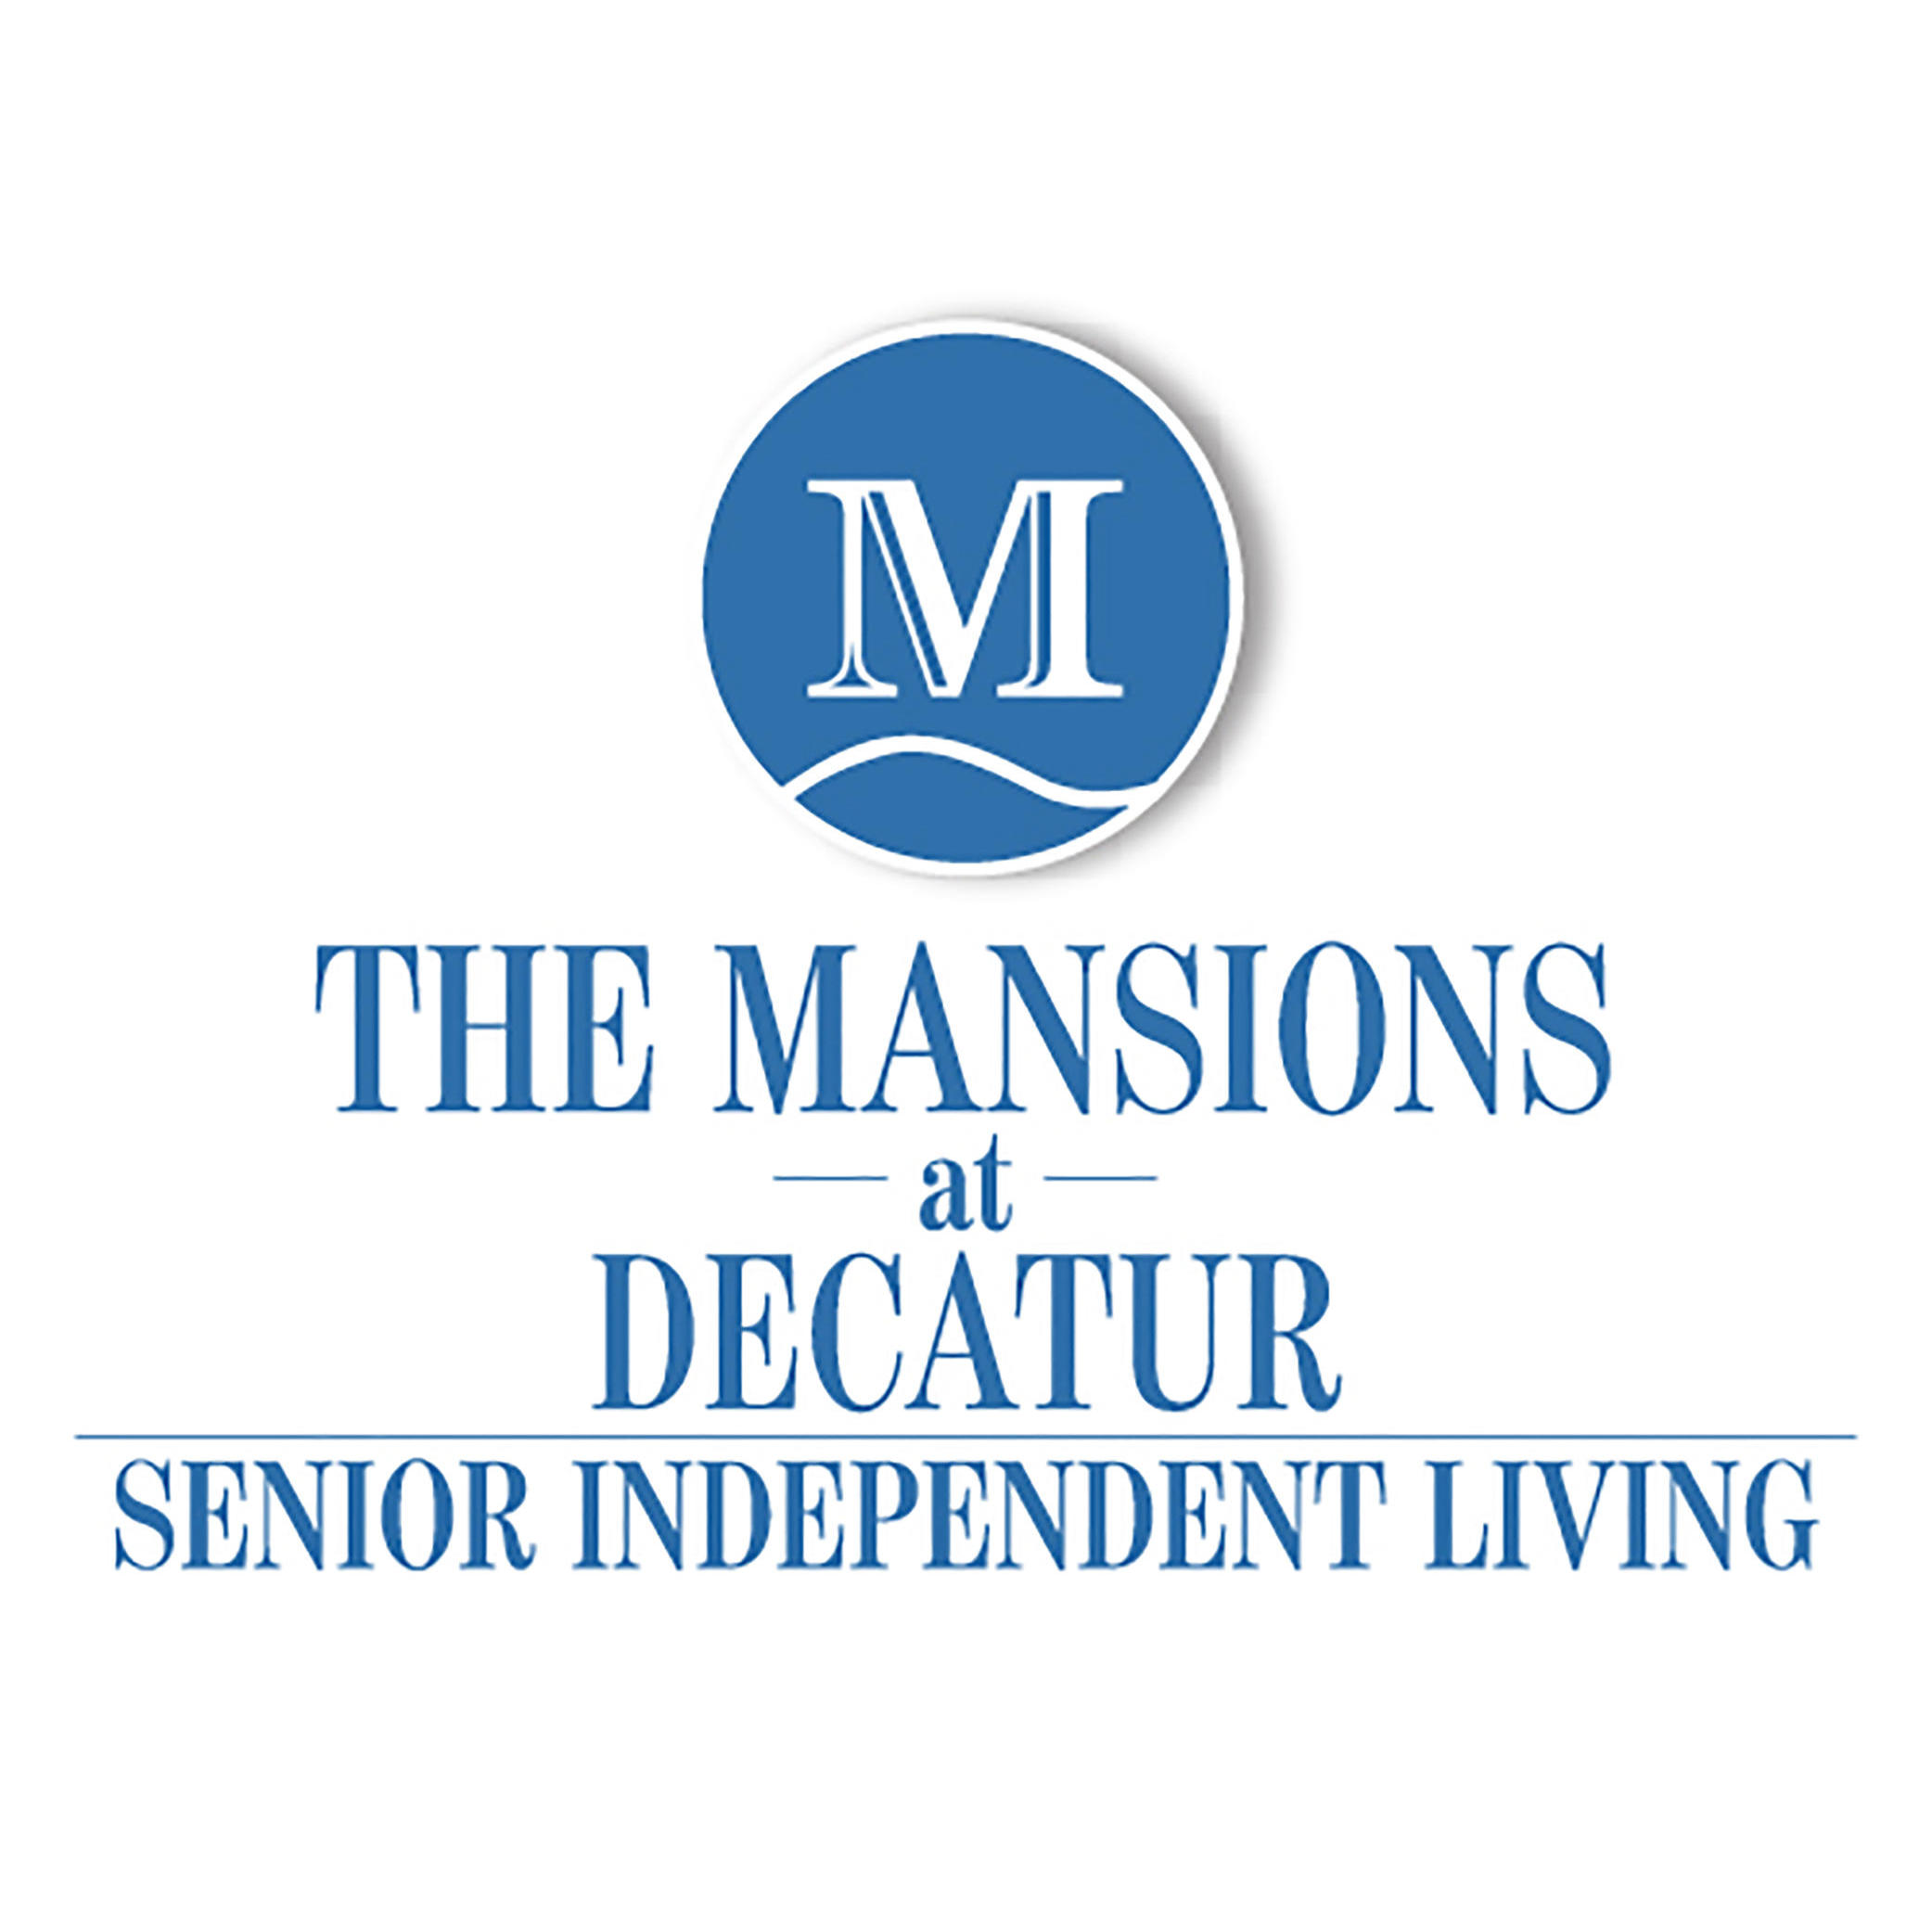 The Mansions at Decatur - Senior Independent Living Logo